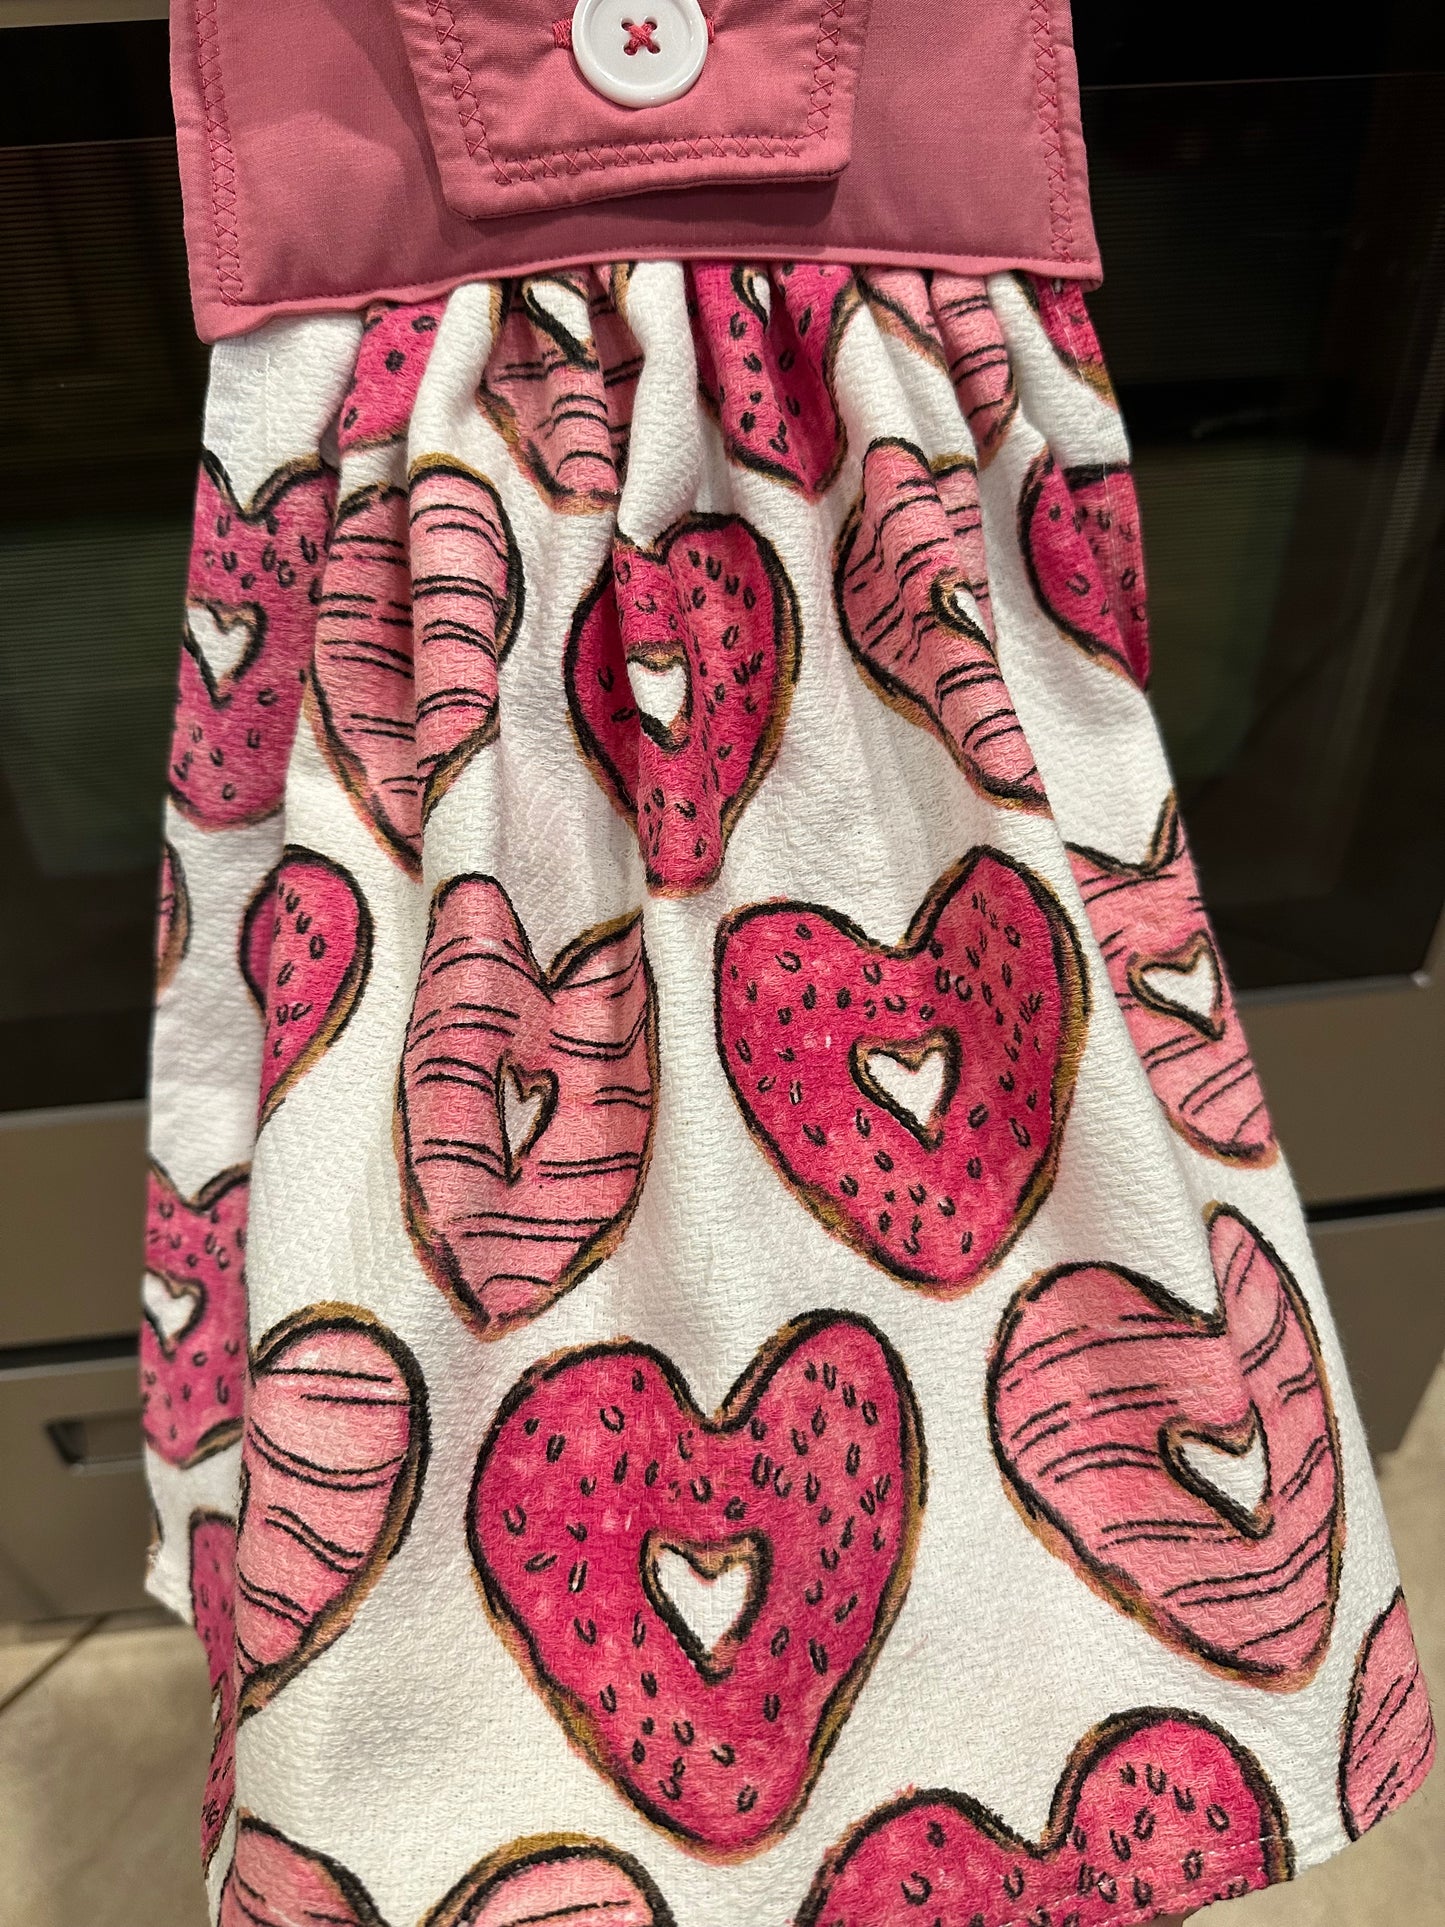 Heart Shaped Donuts Towels